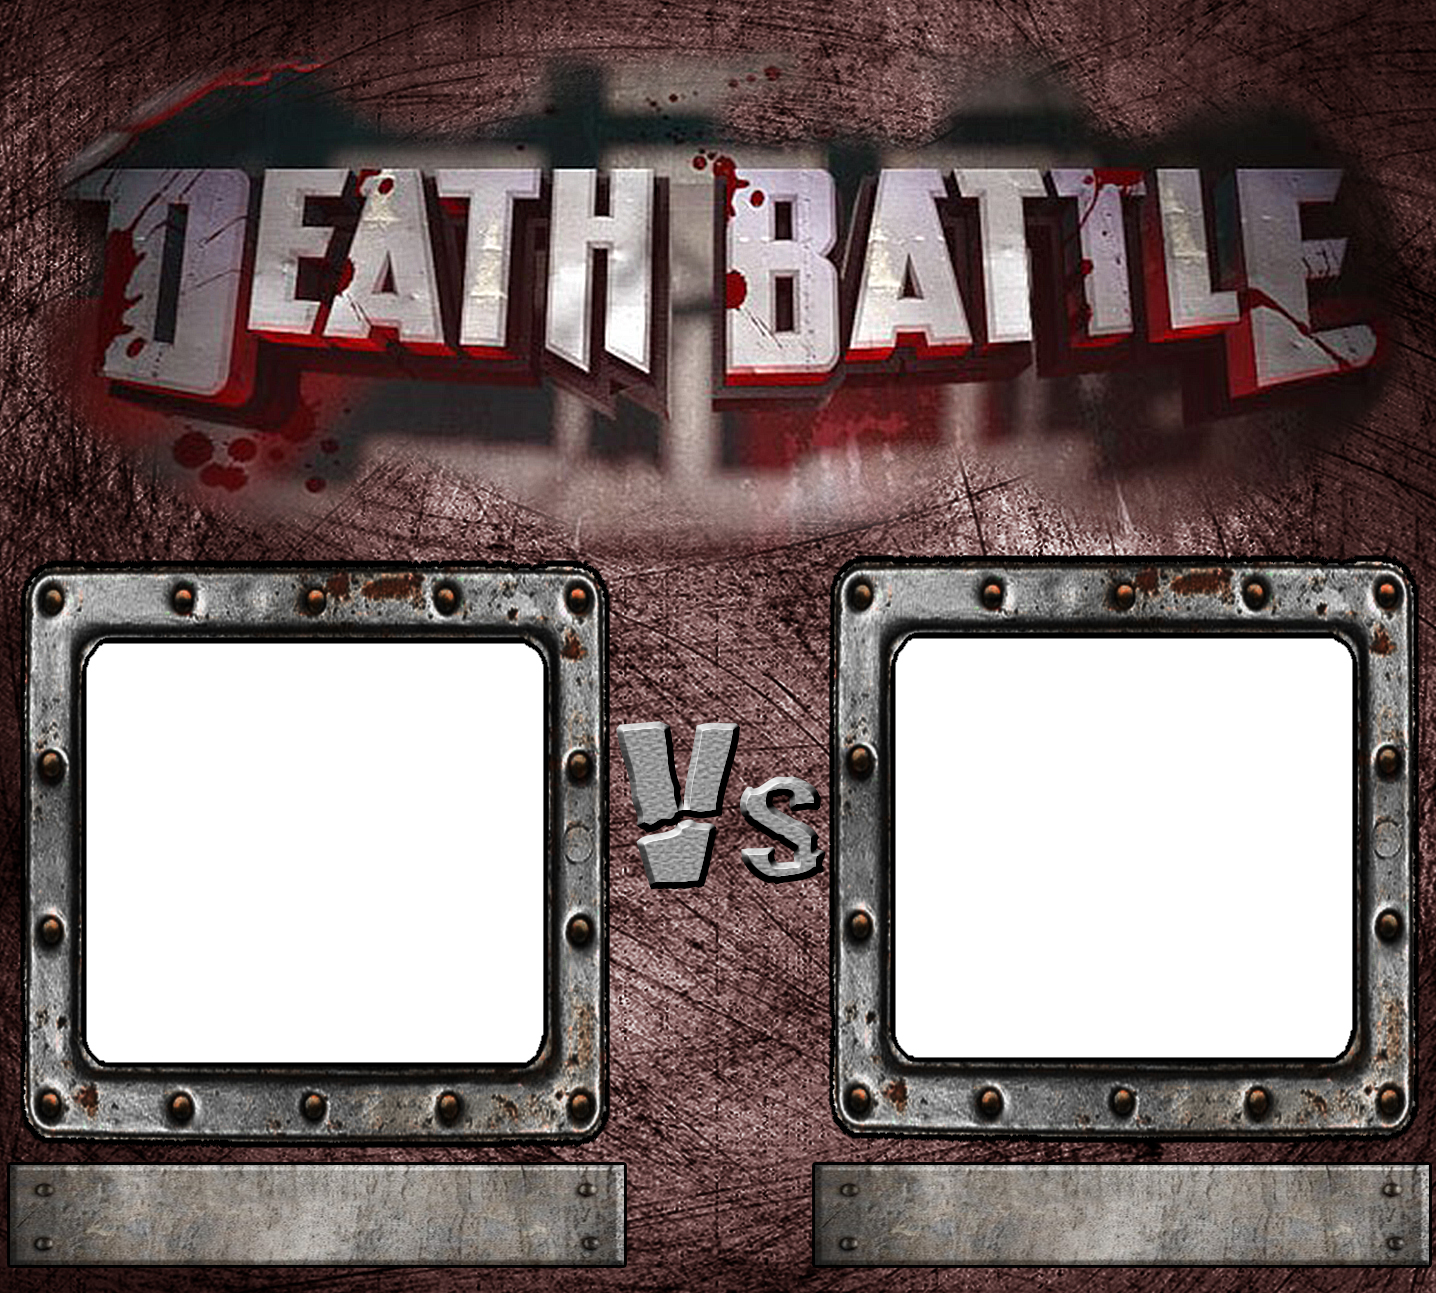 Create Your Own DEATH BATTLE! (RustMetal Template) by CLANNADAT on